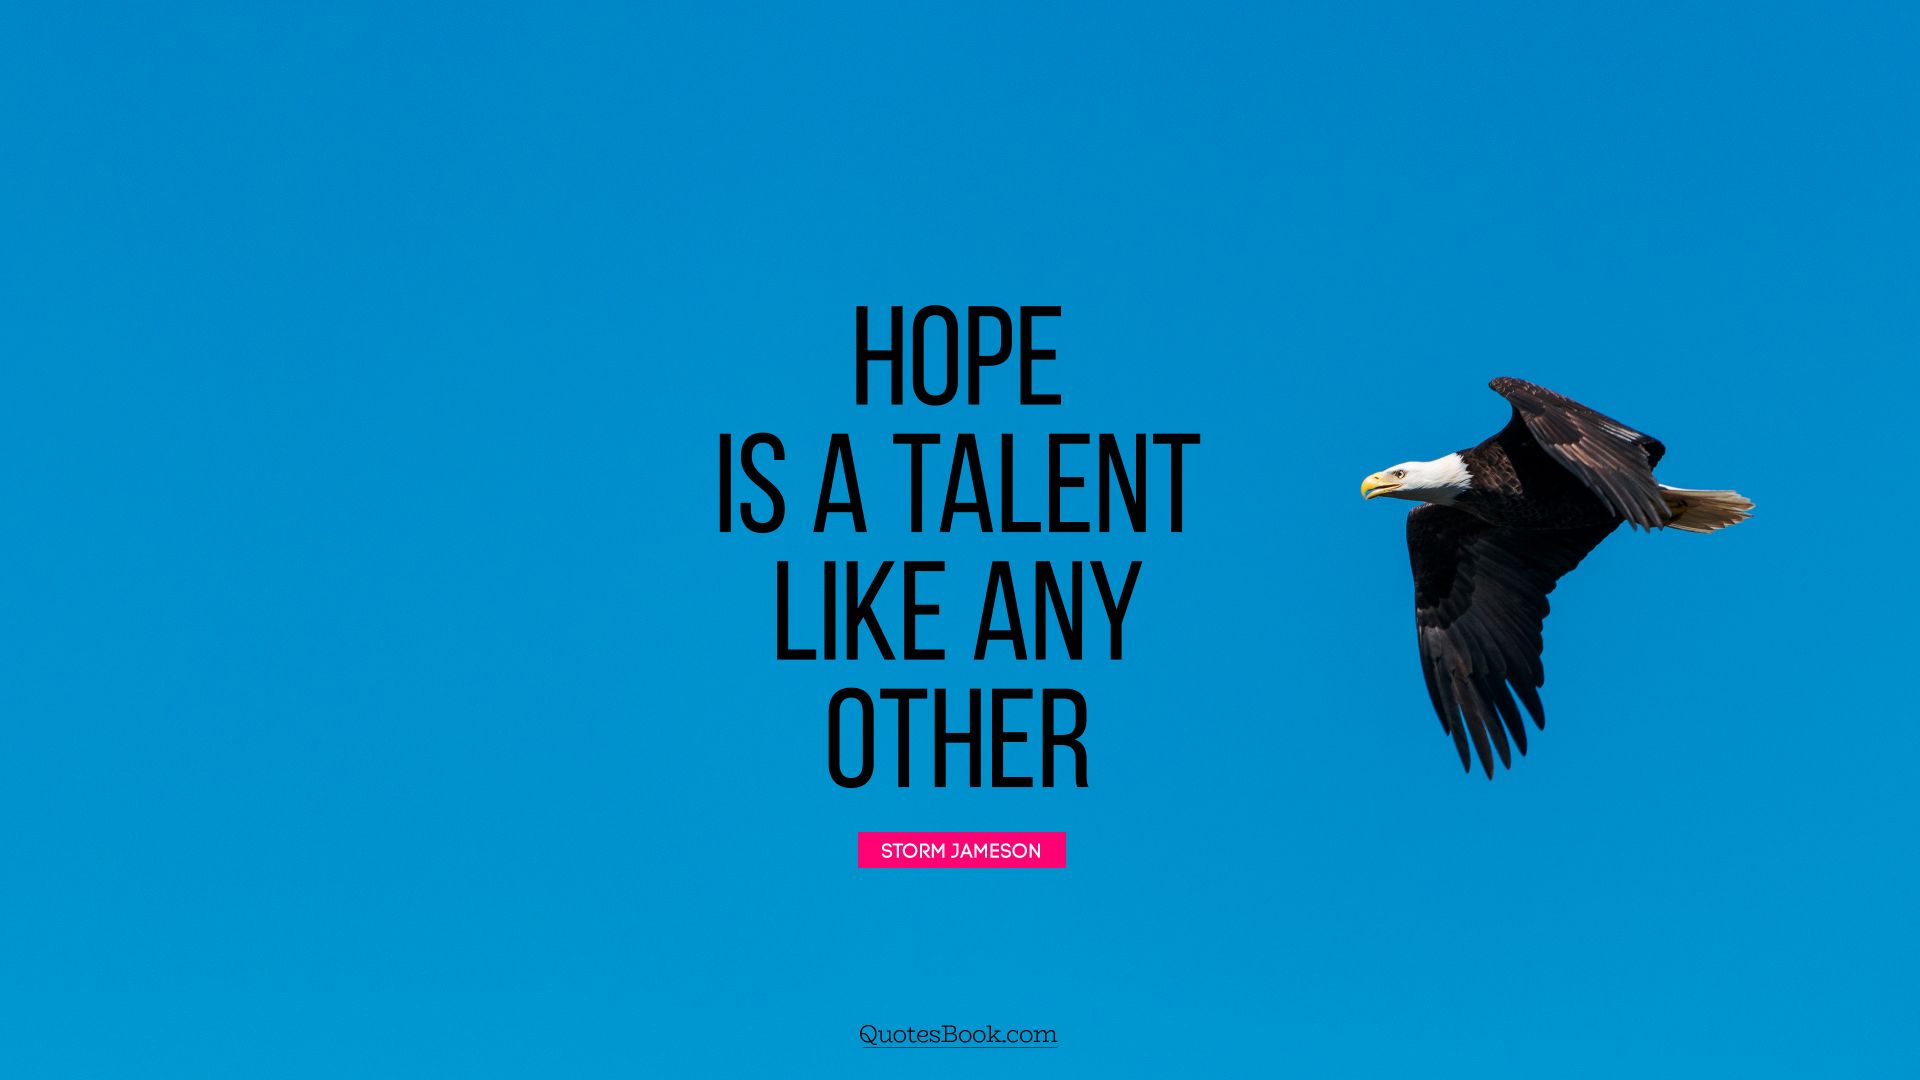 Hope is a talent like any other. - Quote by Storm Jameson